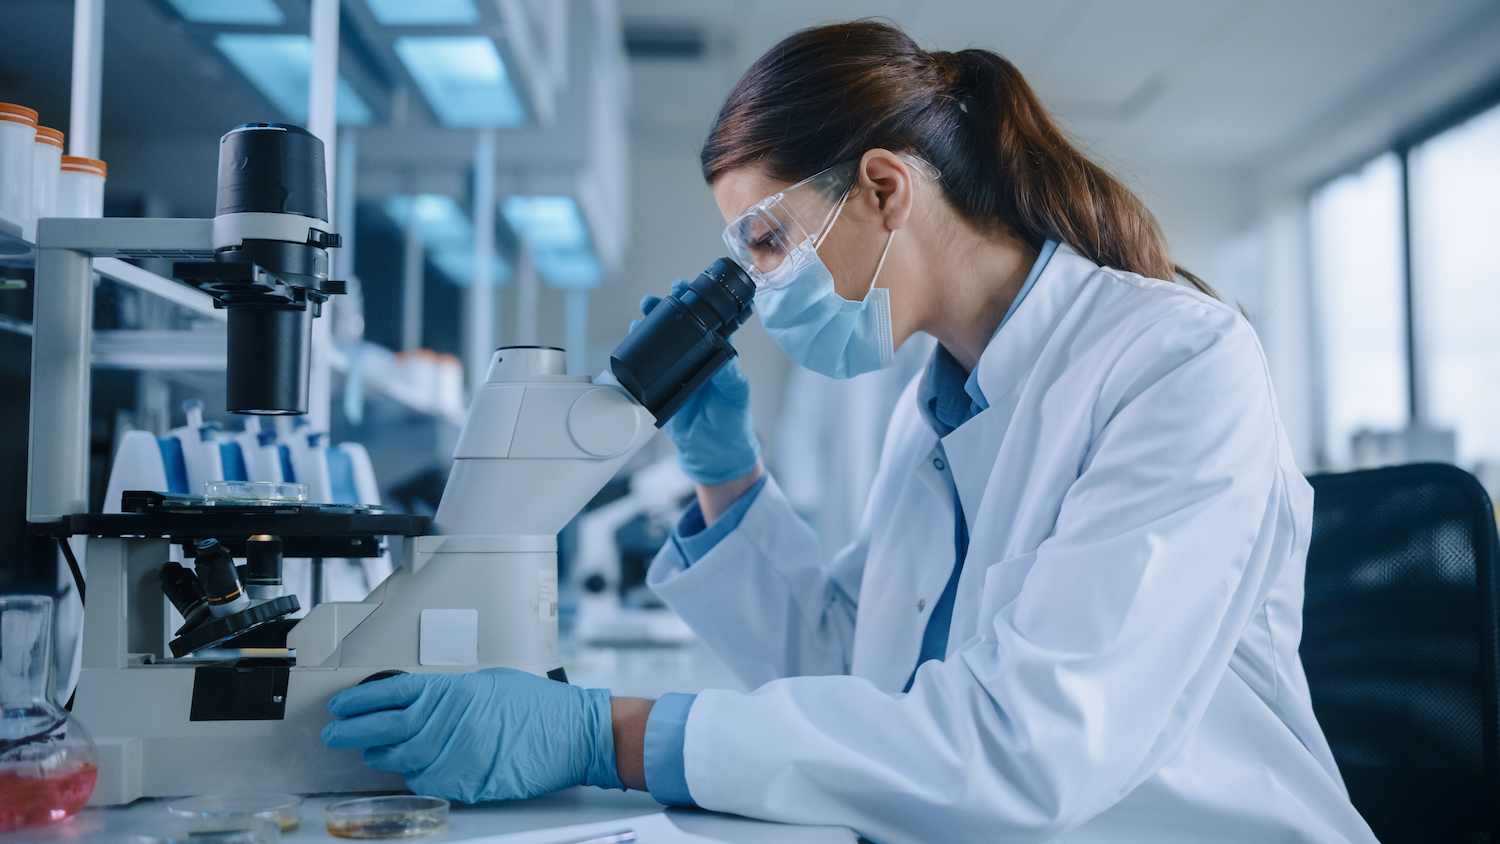 Woman in a lab coat looks into a microscope